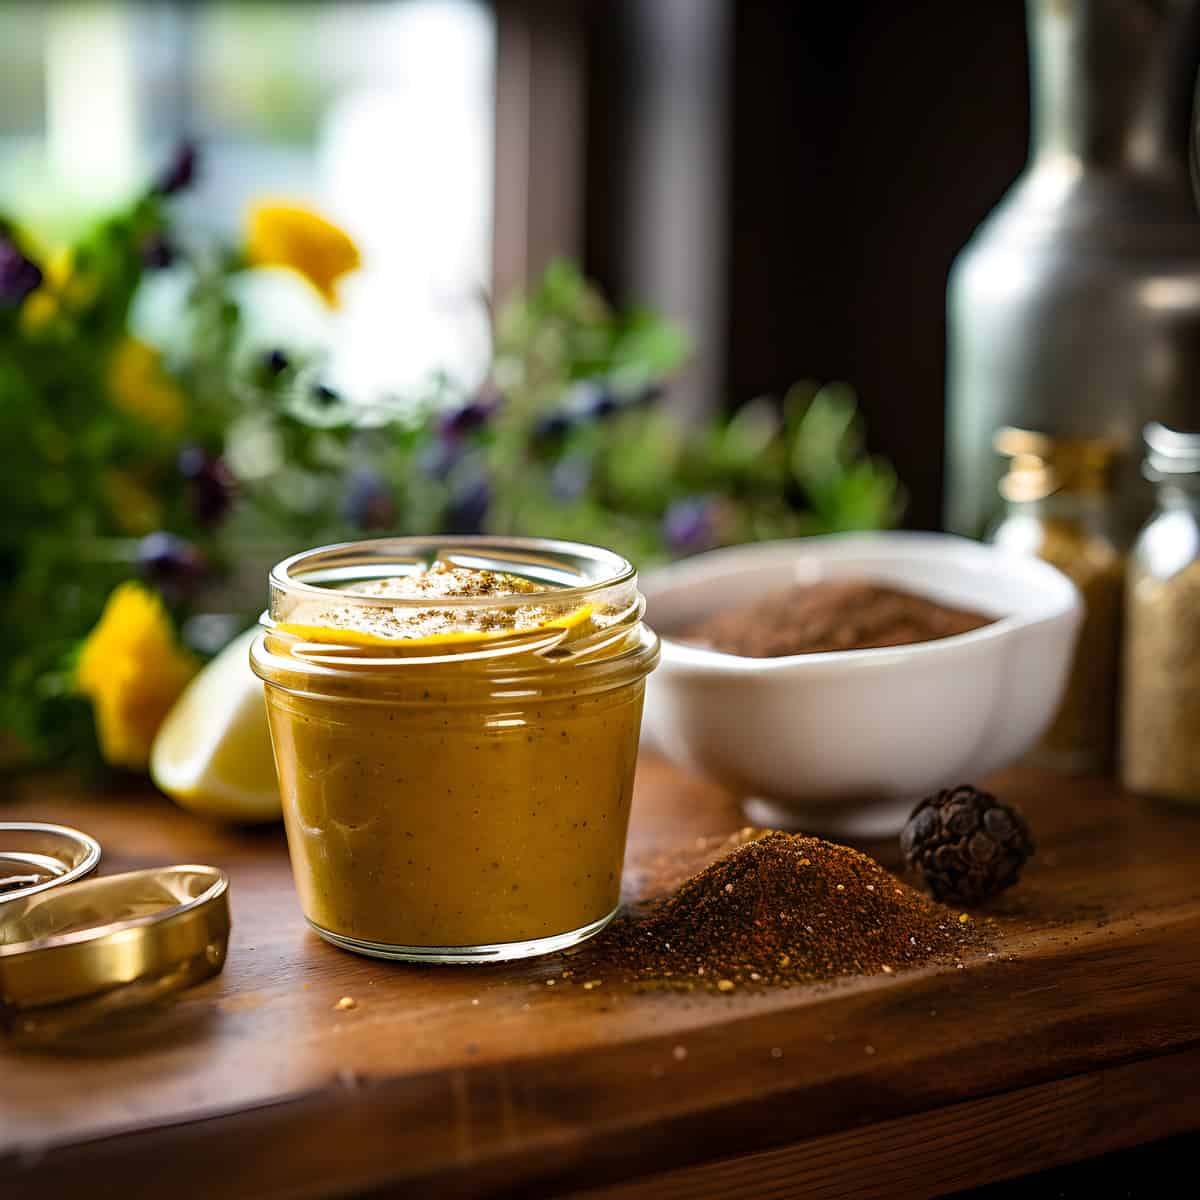 Brown Mustard on a kitchen counter